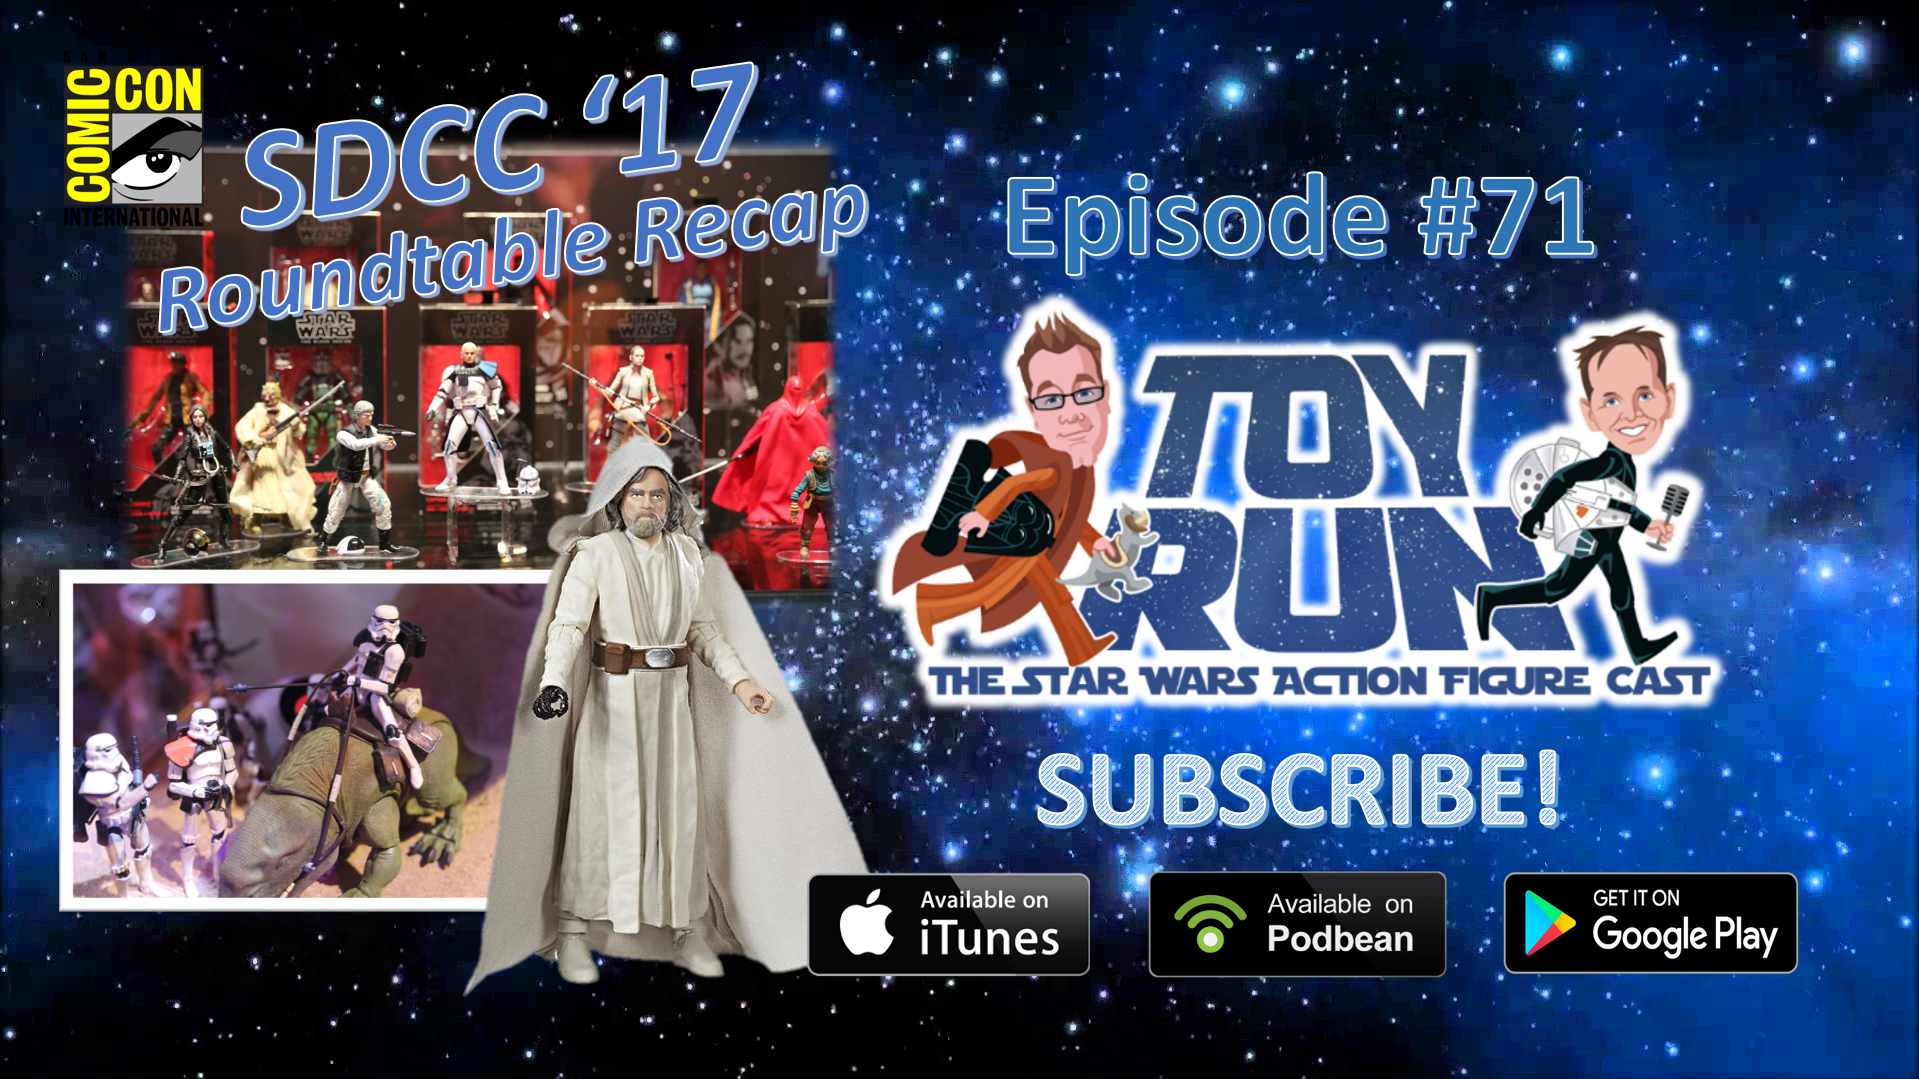 TOY RUN: The SDCC ’17 Episodes